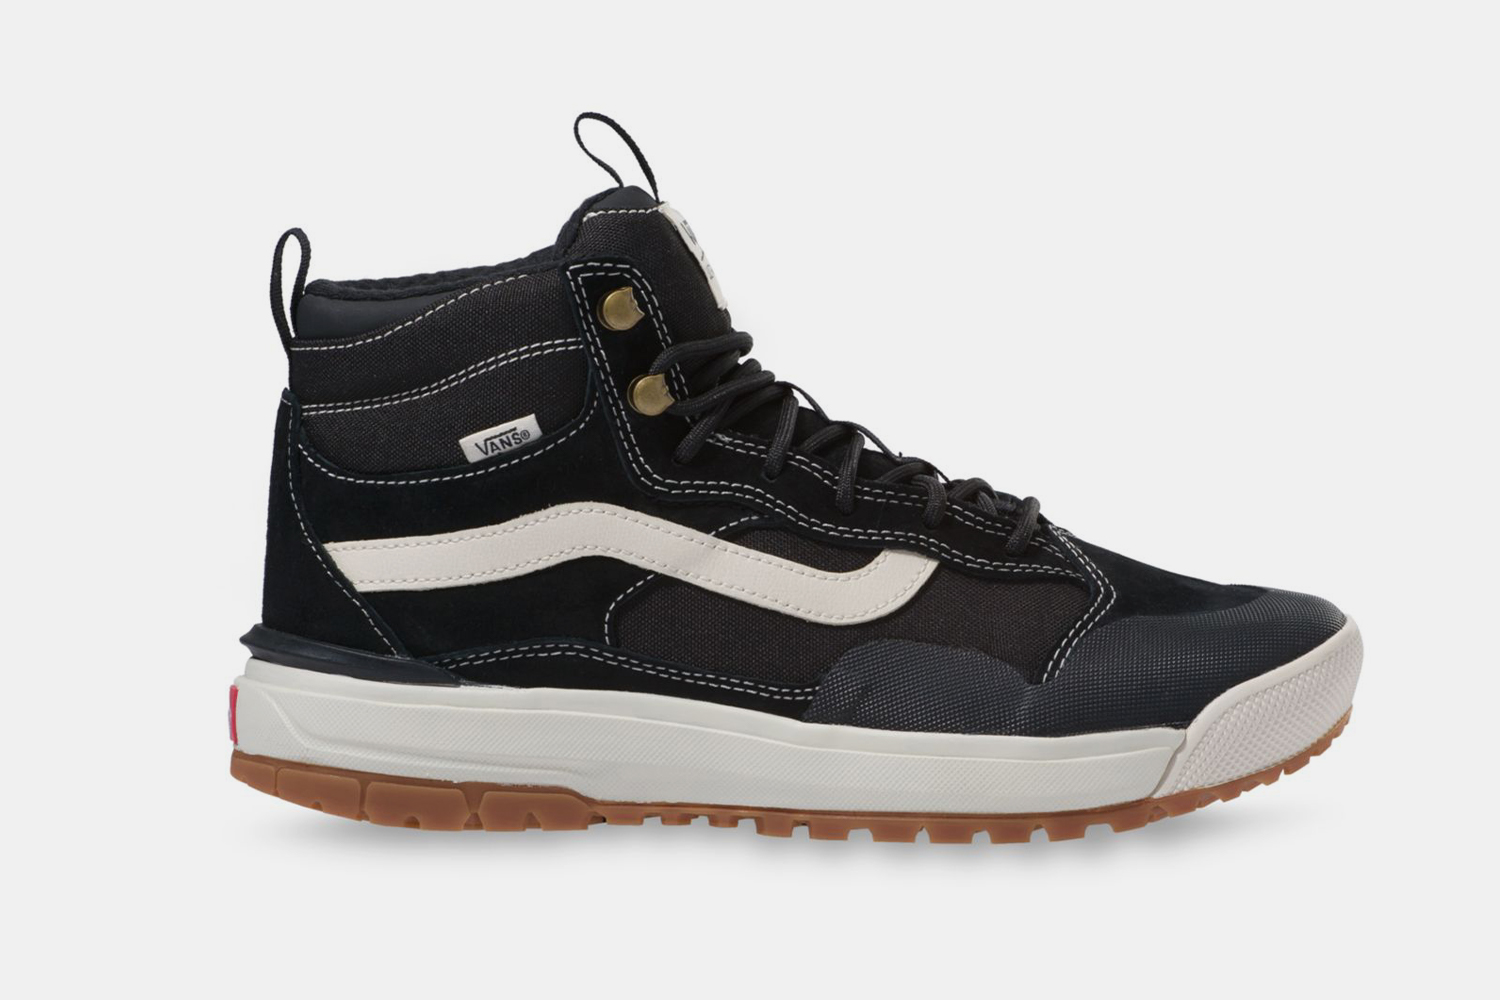 Deal: These Vans Sneaker $20 Off Are InsideHook Boots 